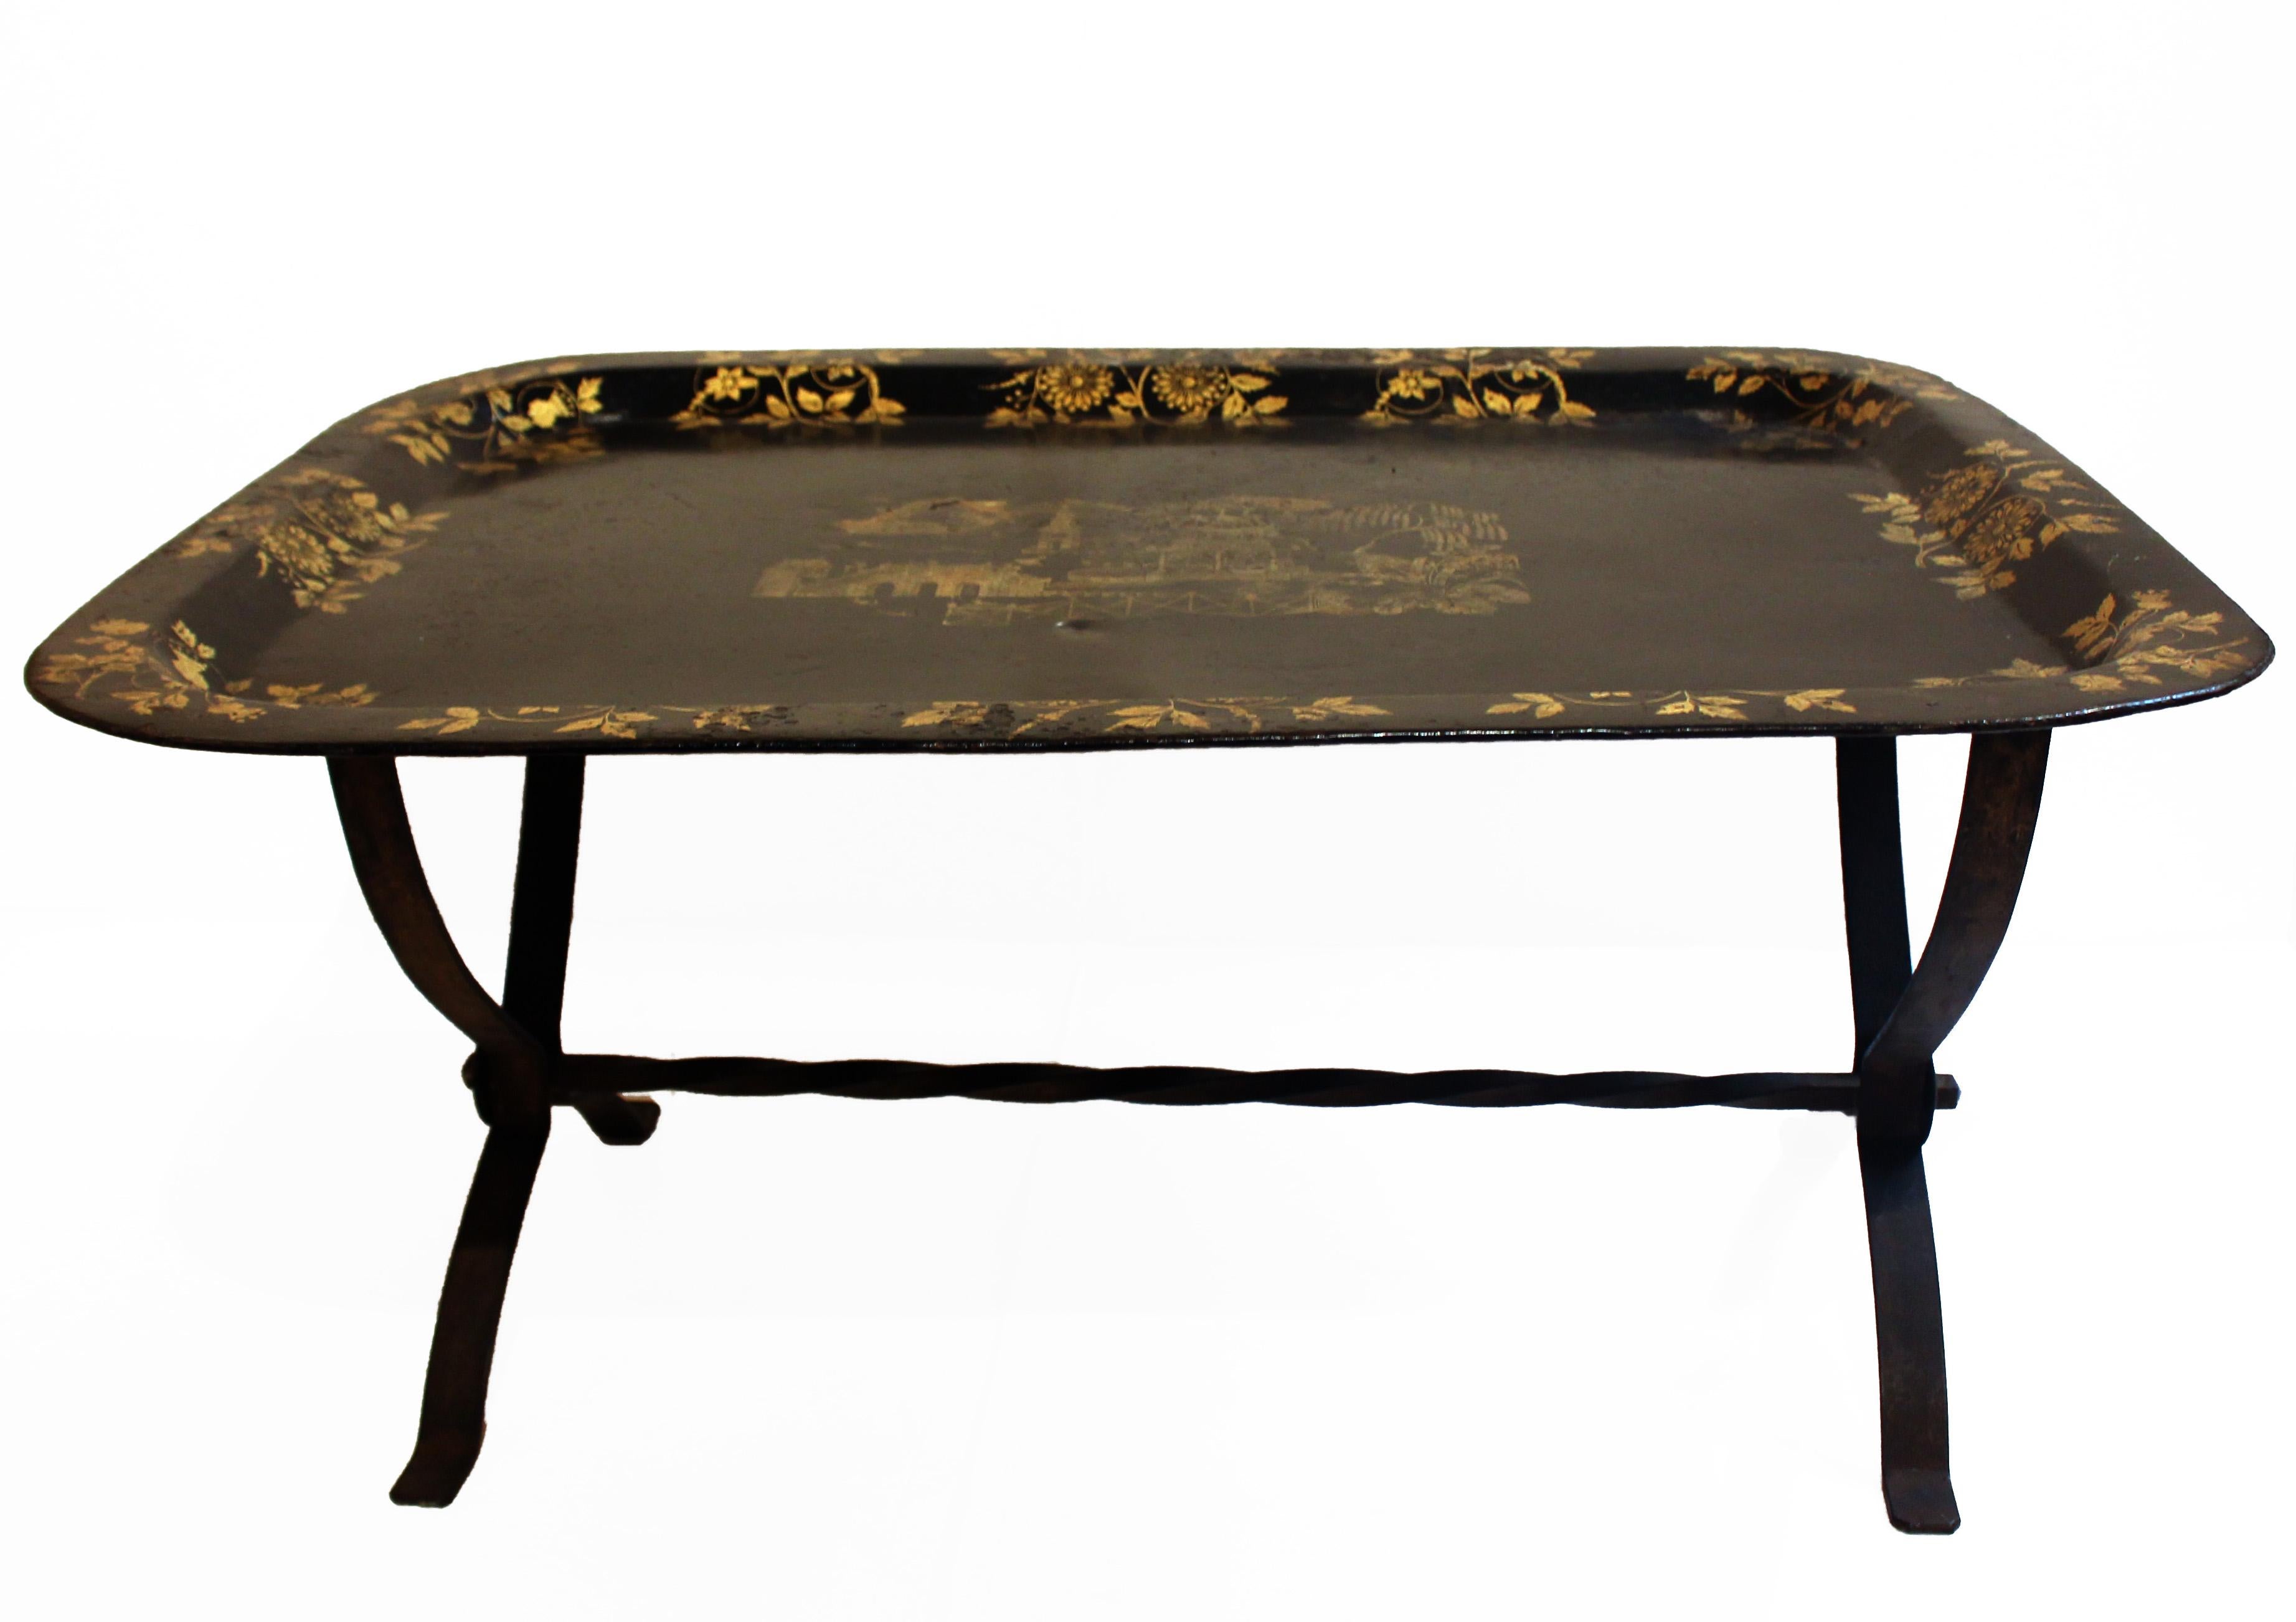 A large c.1830 English Tole Tray - the gilt chinoiserie decoration on black ground in fine unrestored condition. Now on an interesting steel stand of cerrule form made in the 1930's.
33 3/4